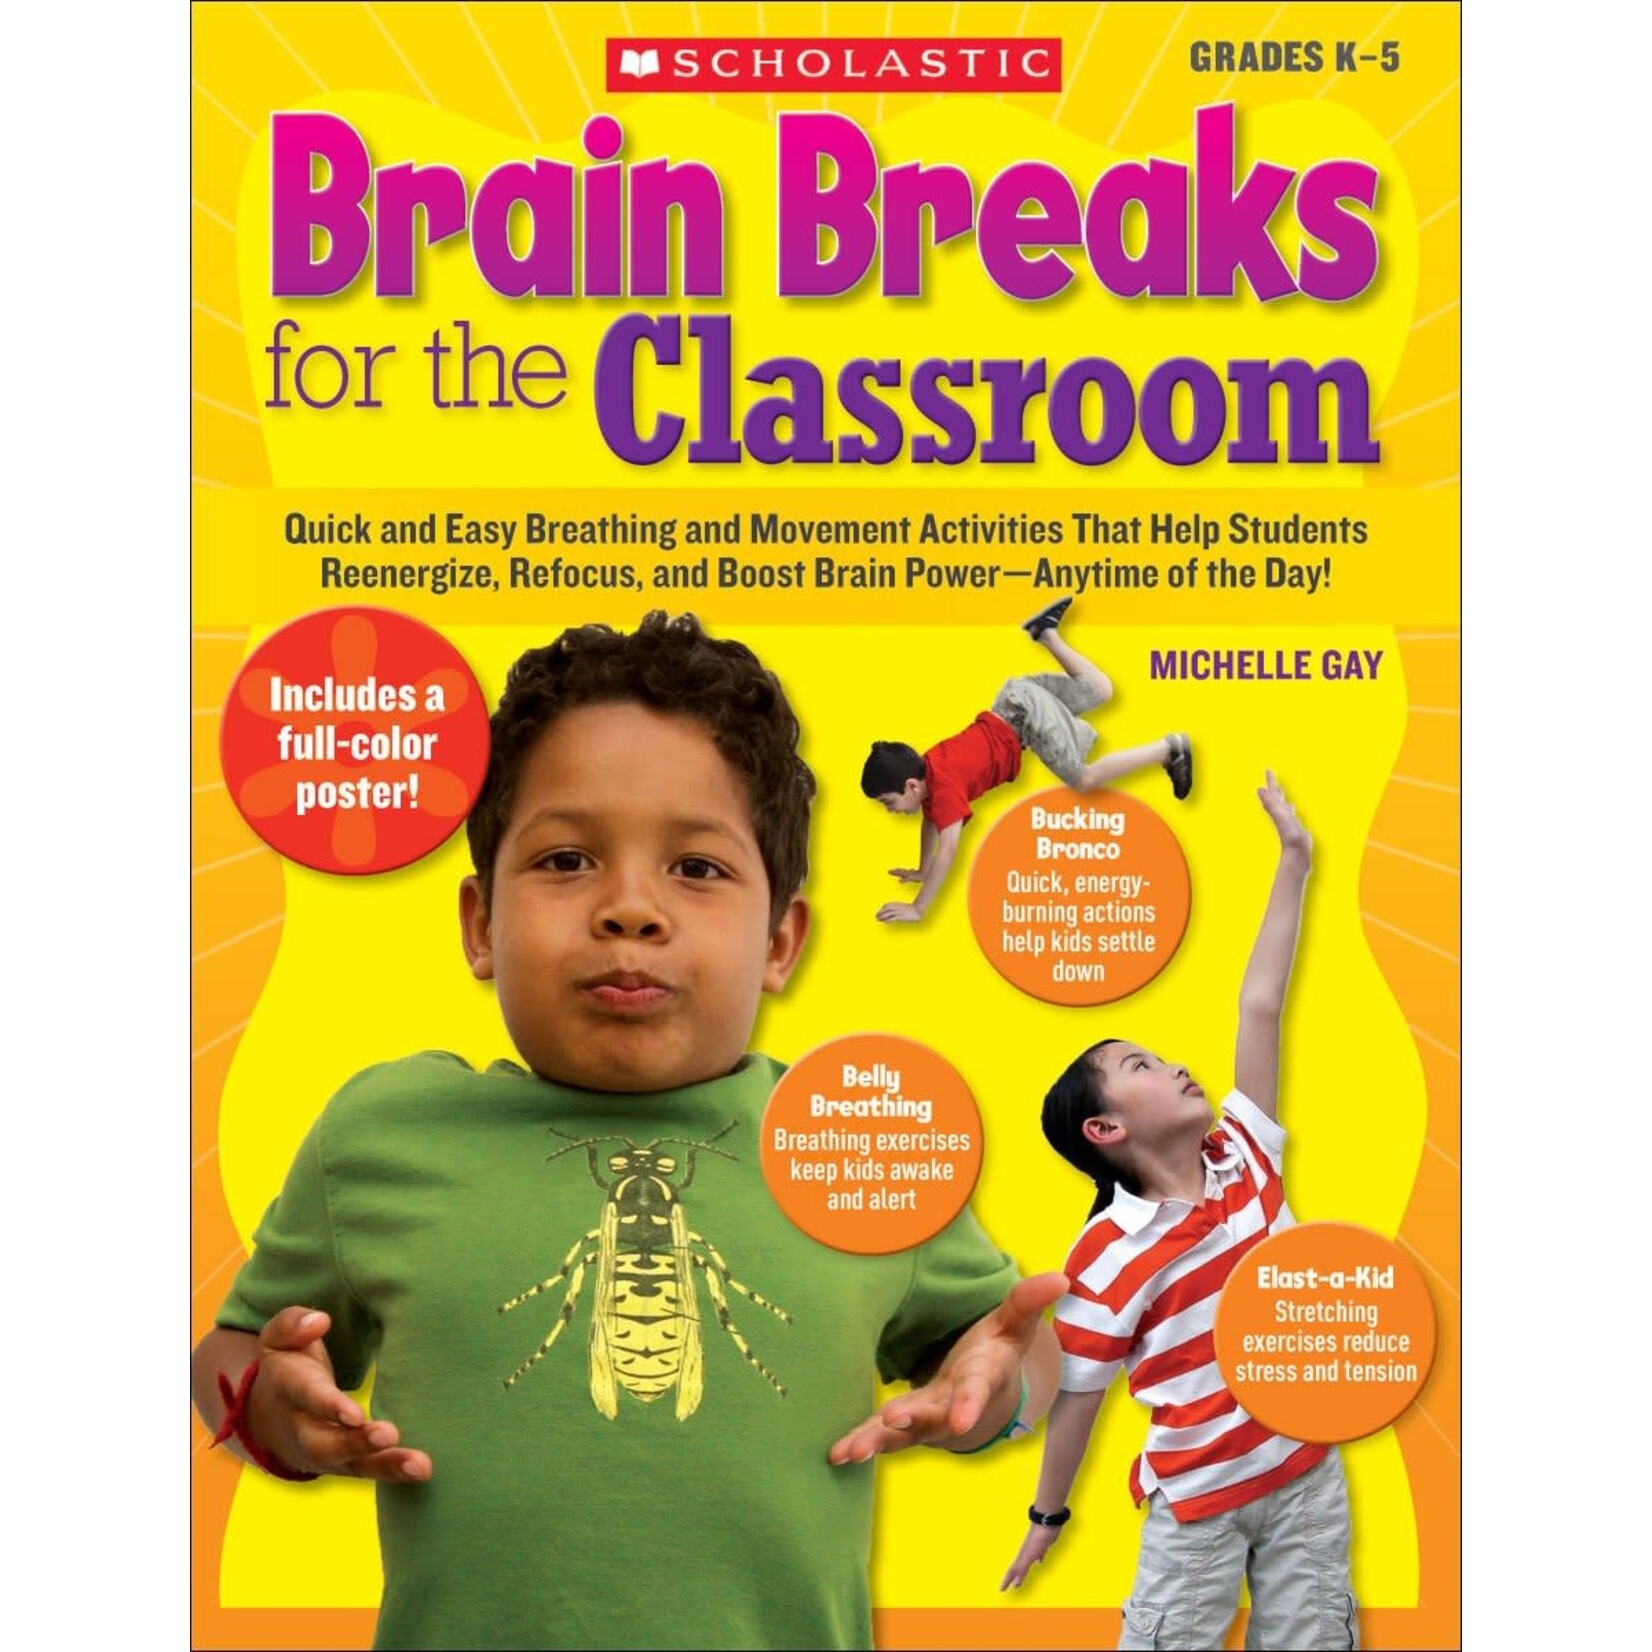 SCHOLASTIC TEACHING RESOURCES Brain Breaks for the Classroom: Help Students Reduce Stress, Reenergize & Refocus